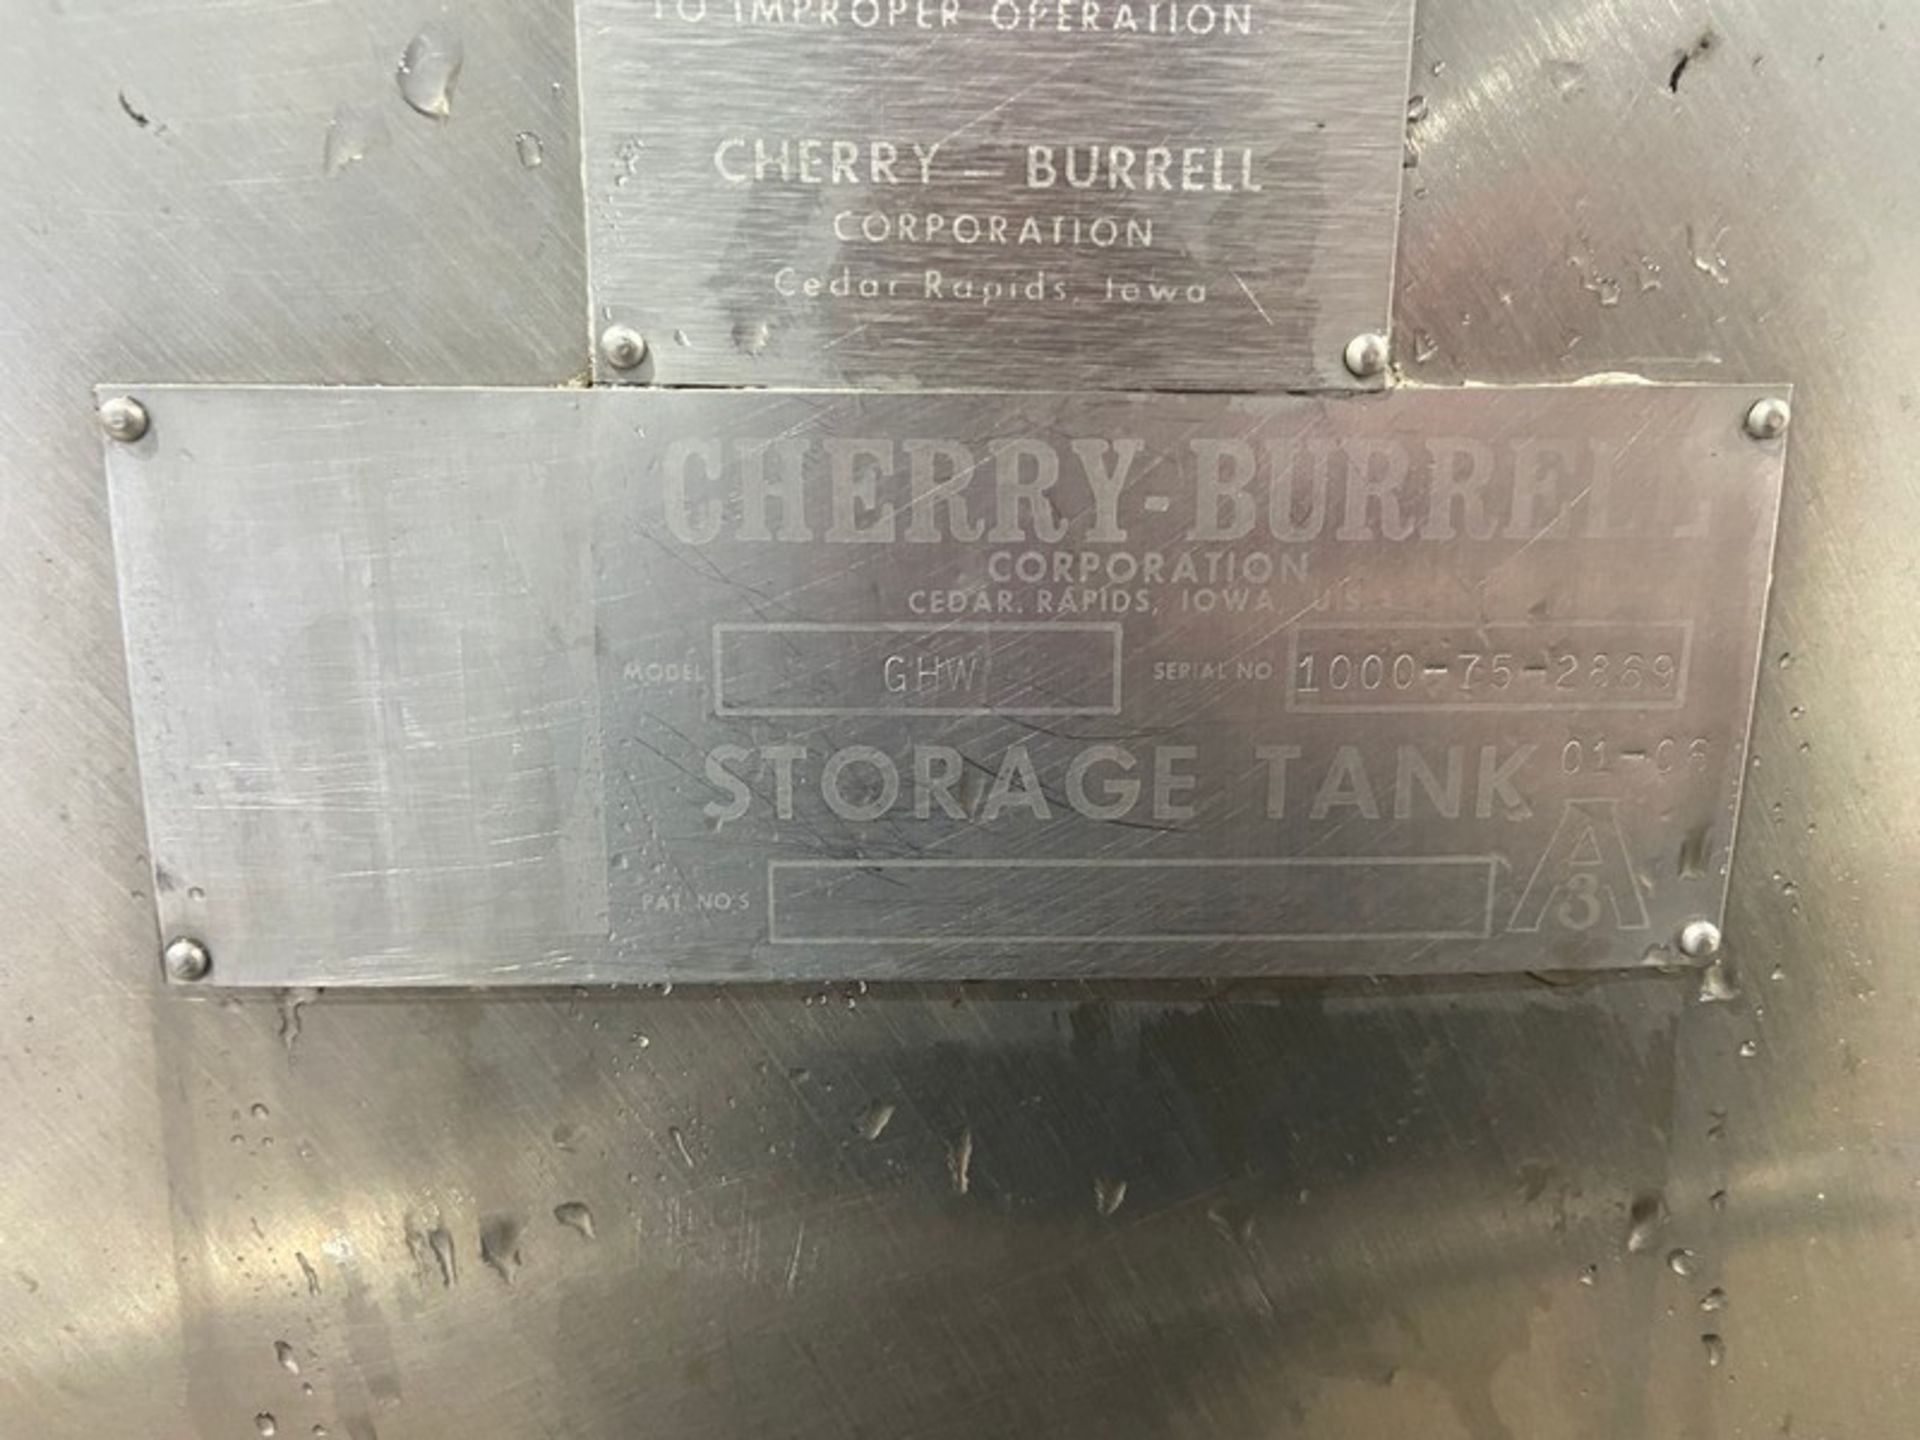 Cherry-Burrell 1,000 Gal. S/S Jacketed Tank, M/N GHW, S/N 1000-75-2869, Mounted on S/S Legs (NOTE: - Image 3 of 17